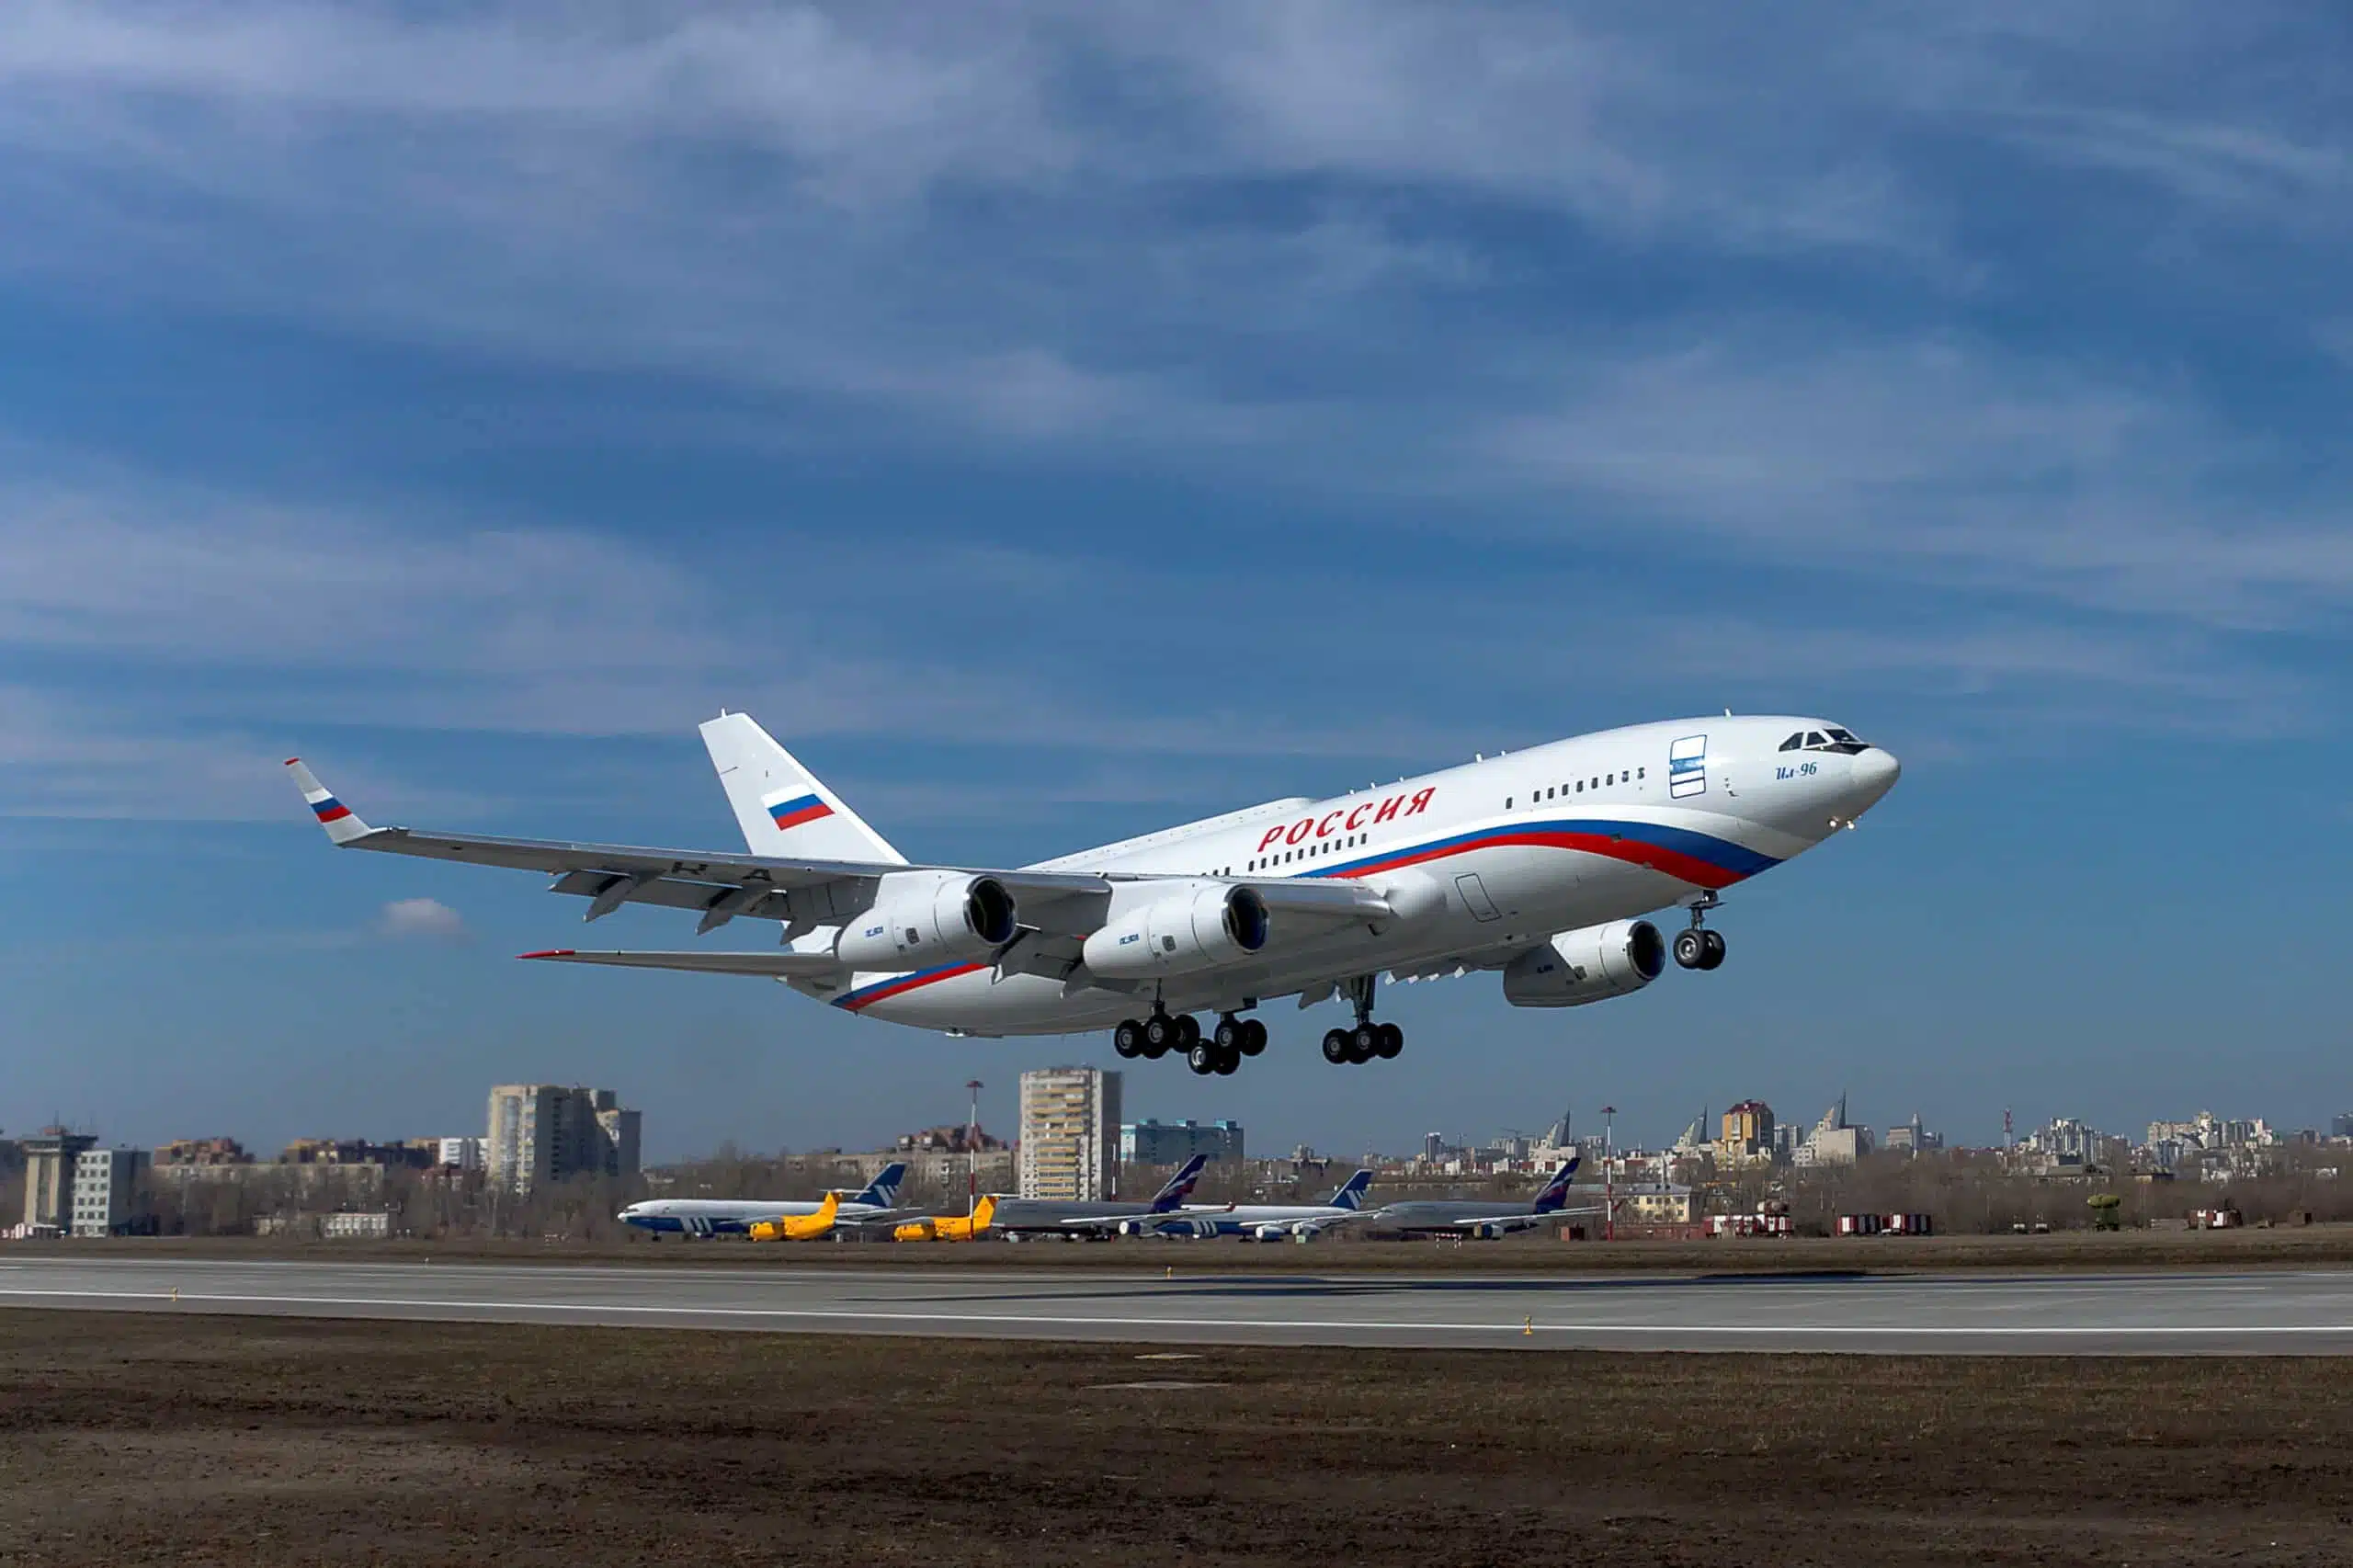 Russia prohibits its pilots from working for foreign airlines.